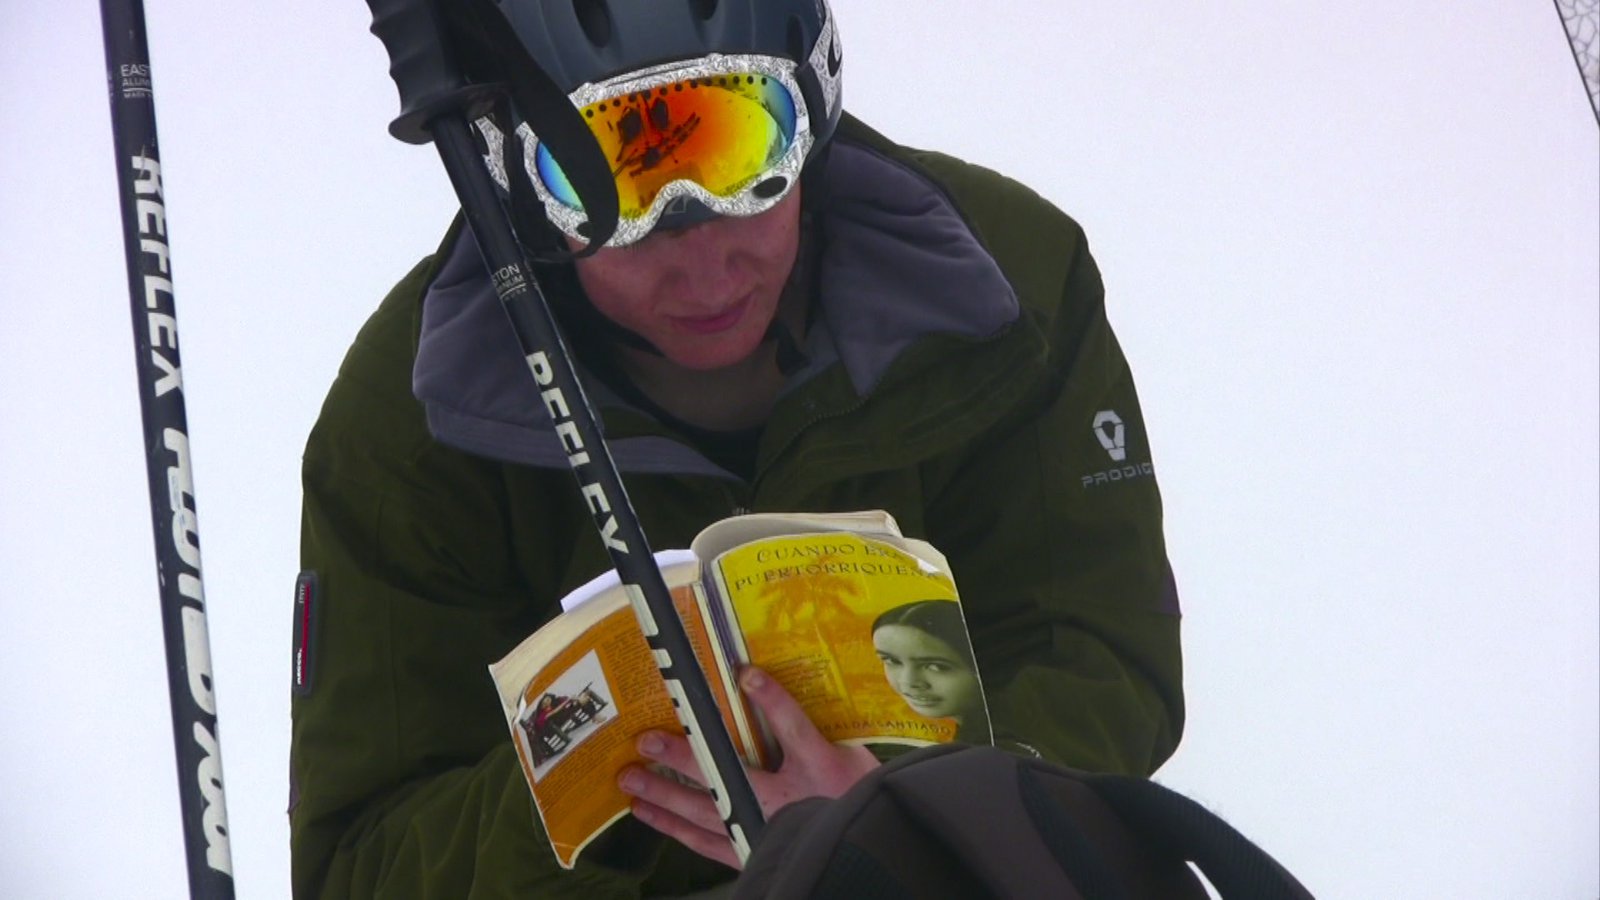 Reading a book at the summit